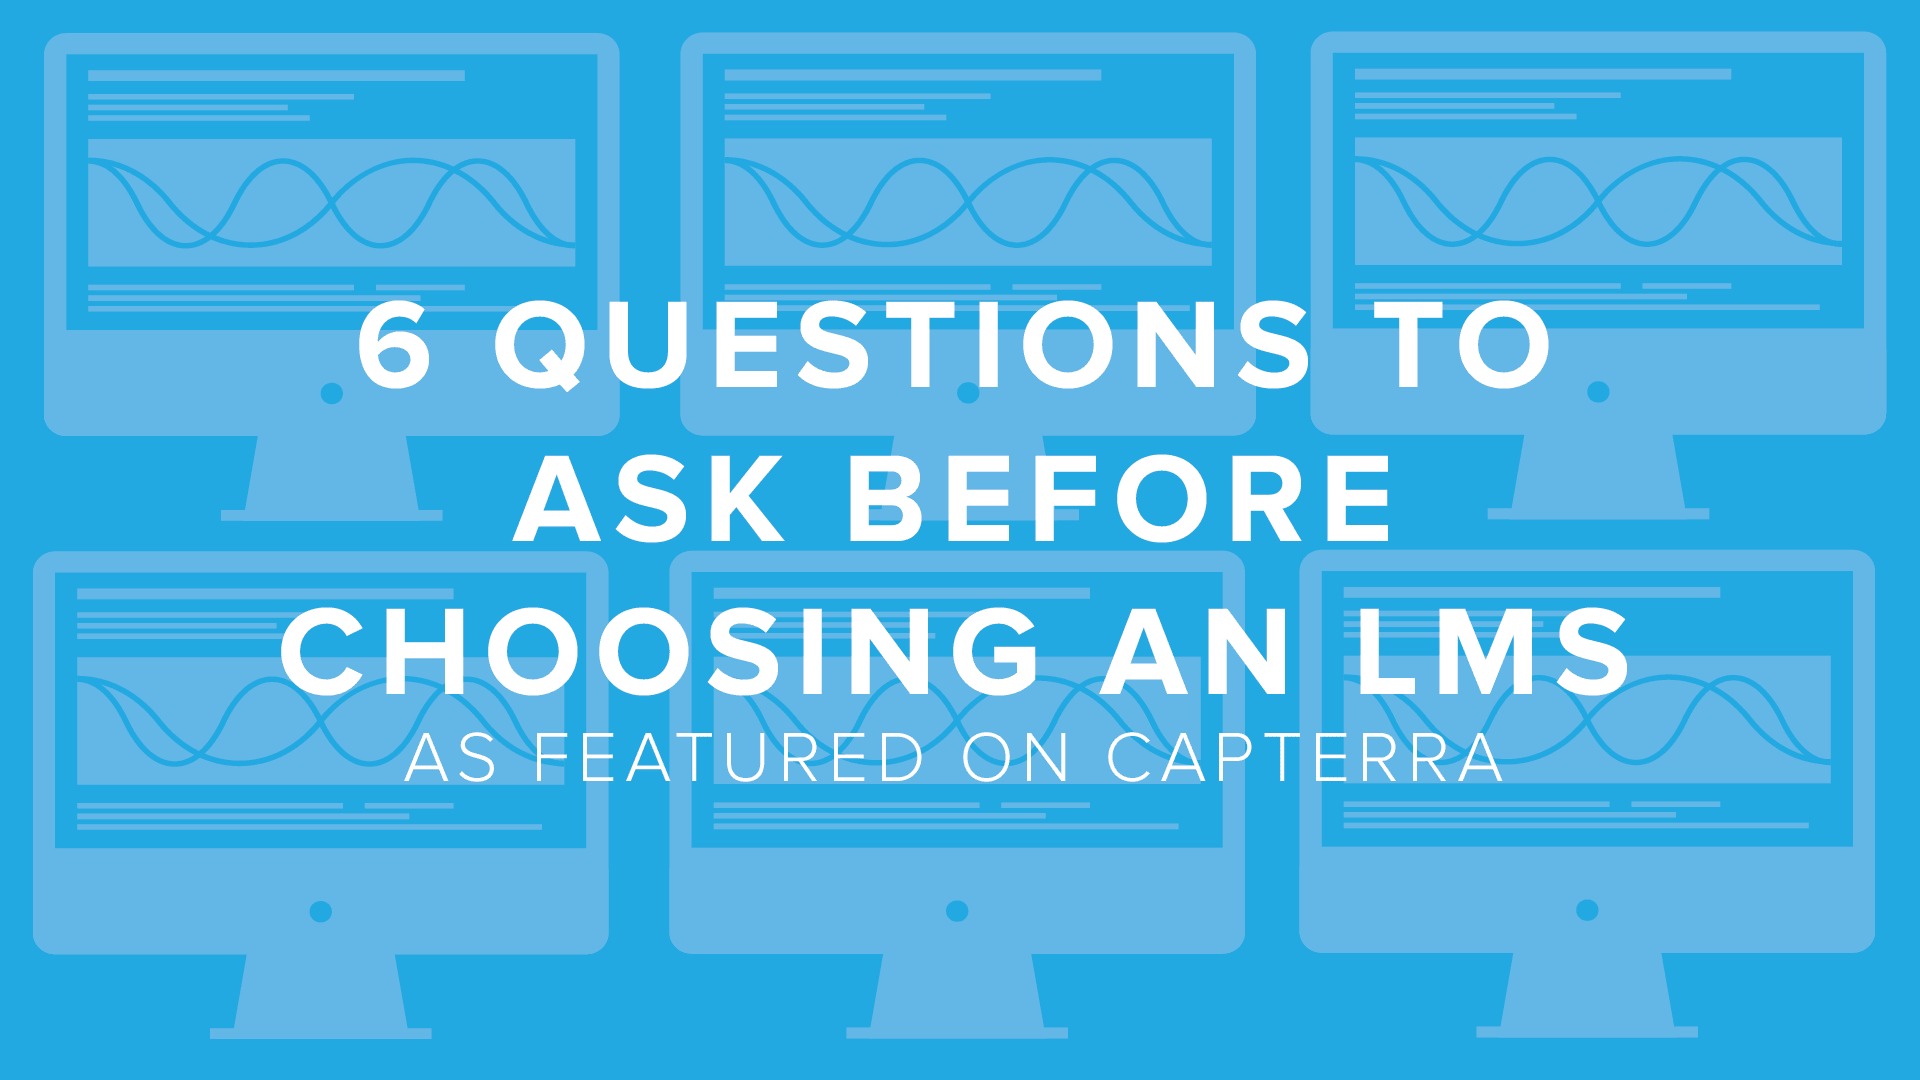 DigitalChalk: As Featured on Capterra: 6 Questions to Ask Before Choosing an LMS